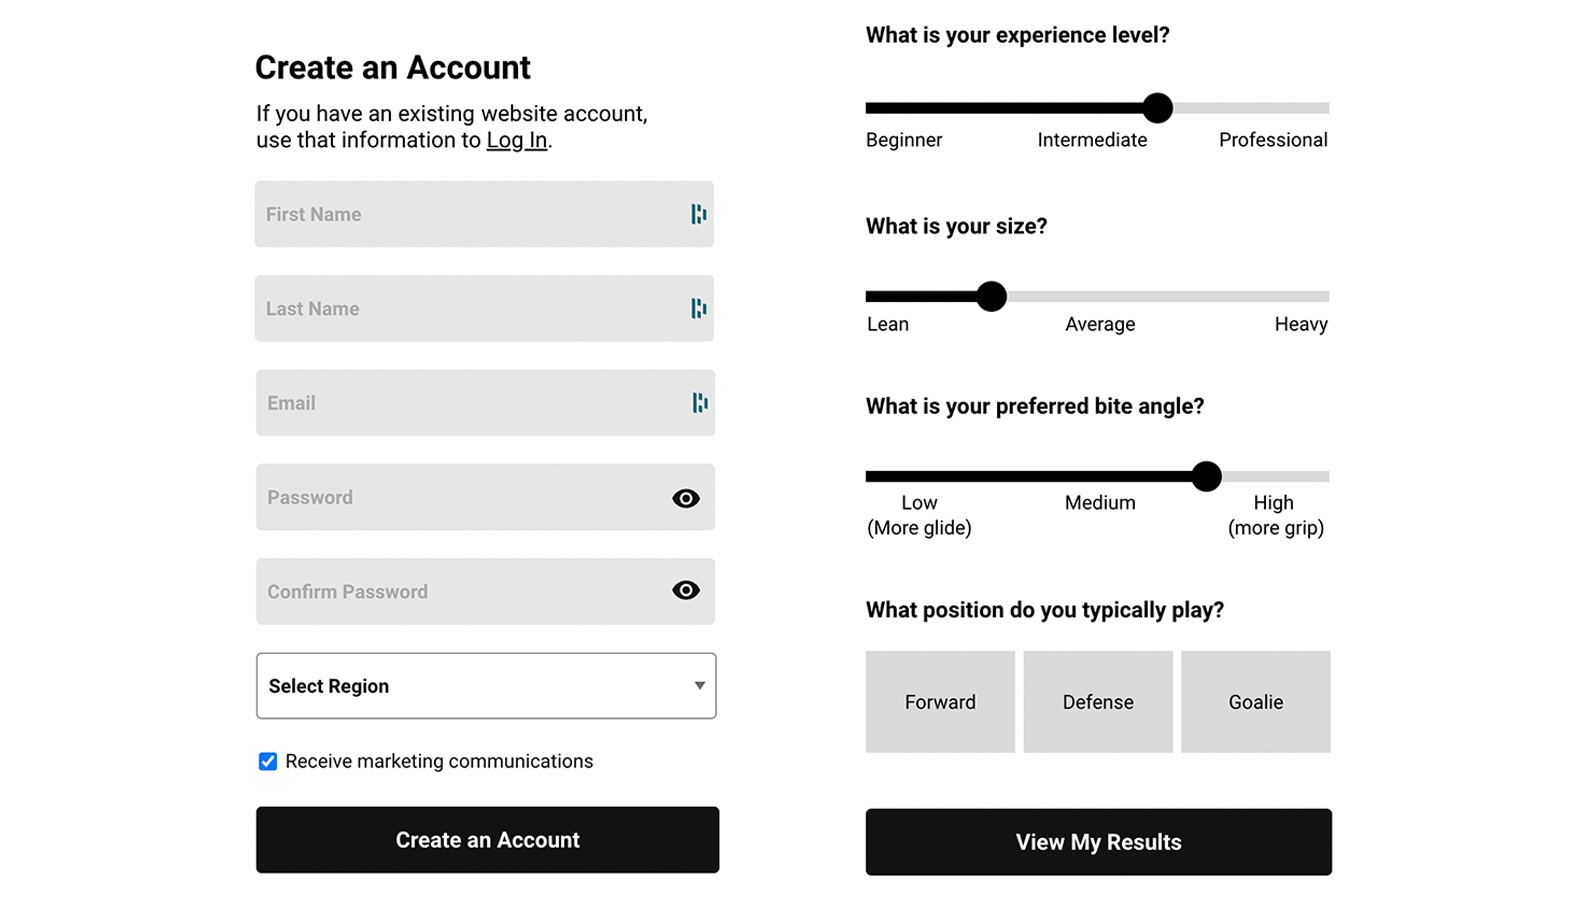 Wireframe of account creation and experience quiz shown on mobile devices